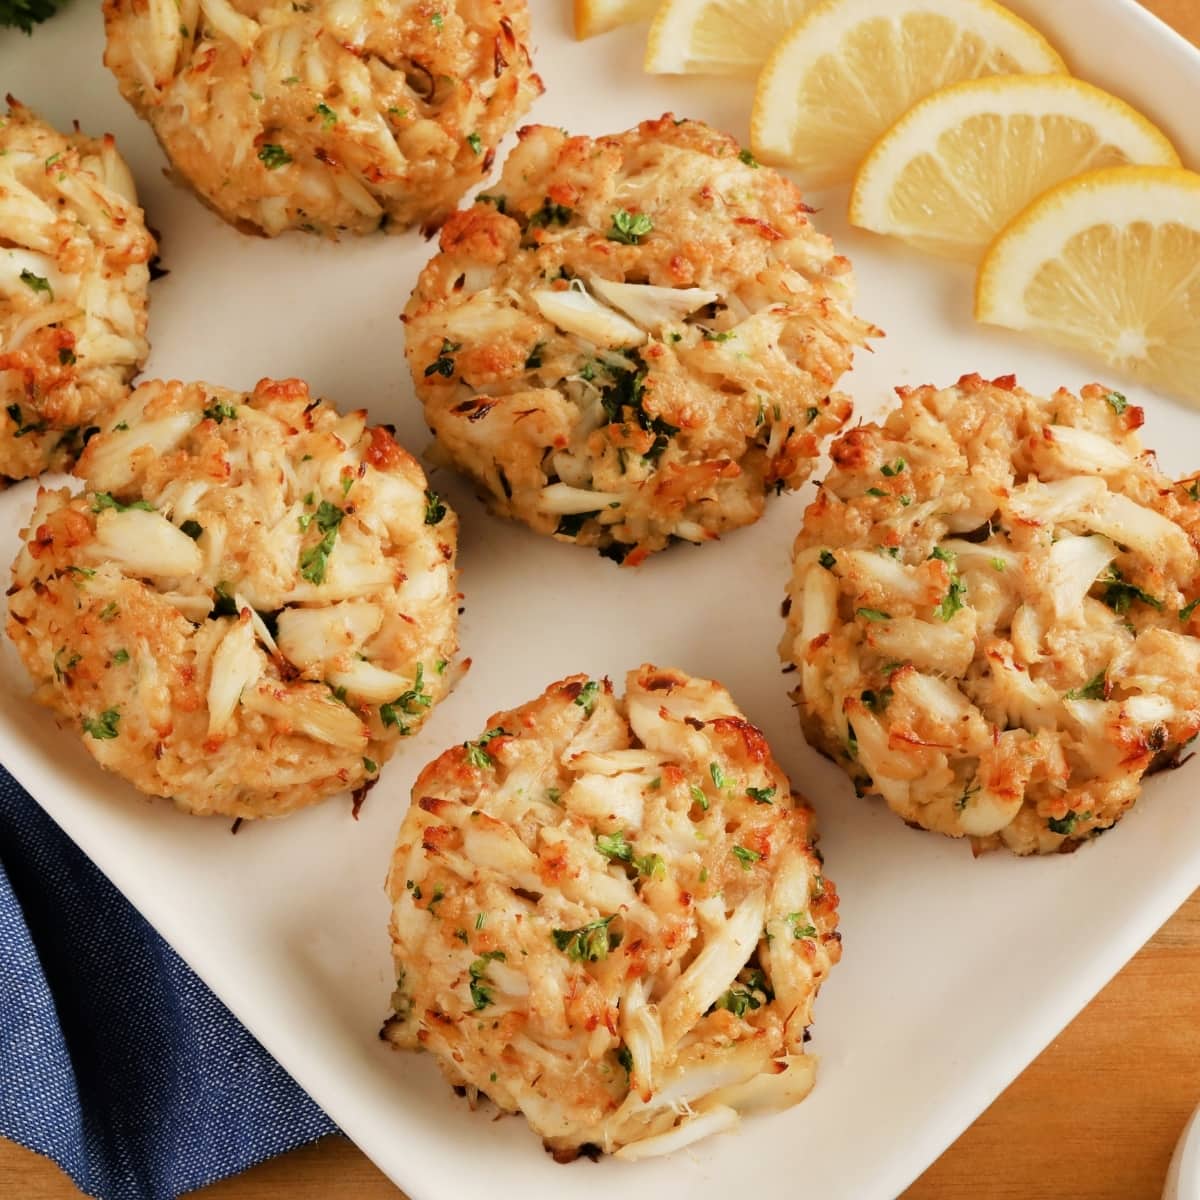 Baltimore-style crab cakes is classic - The Andalusia Star-News | The  Andalusia Star-News